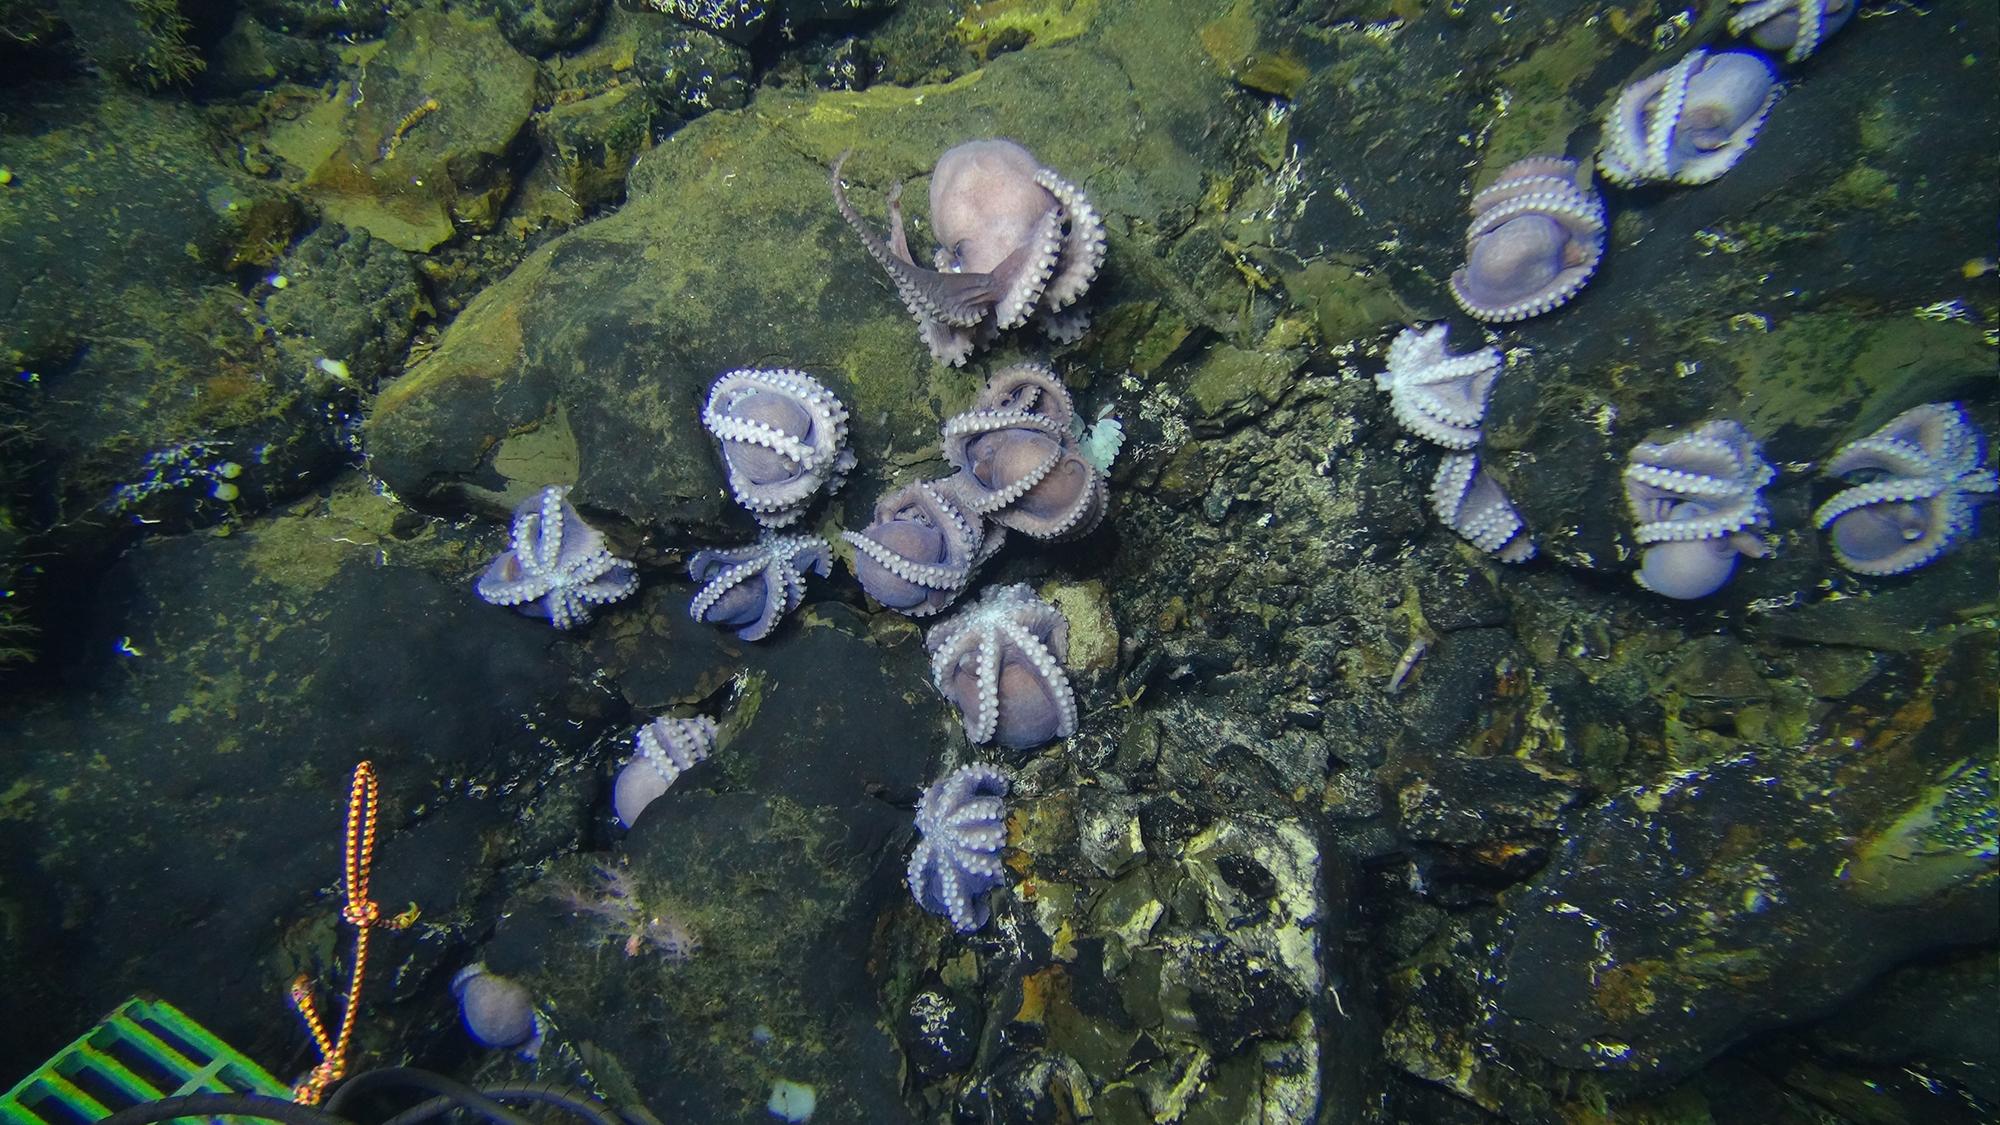 Scientists discovered octopus colonies nearly 2 miles below the surface of the Pacific Ocean. (Phil Torres and Geoff Wheat / The Field Museum)